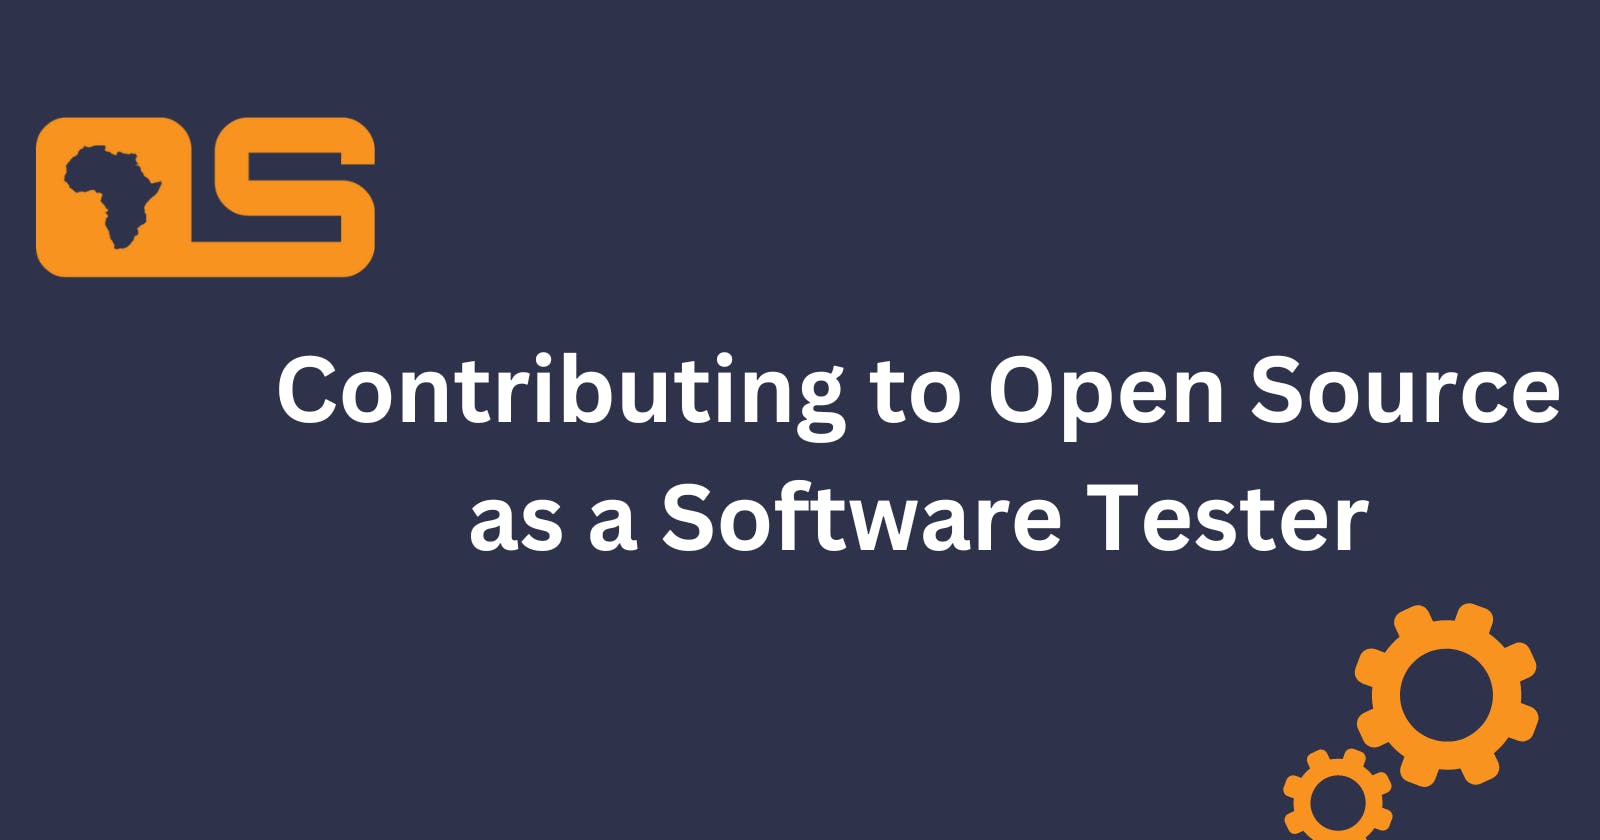 Contributing to Open Source as a Software Tester